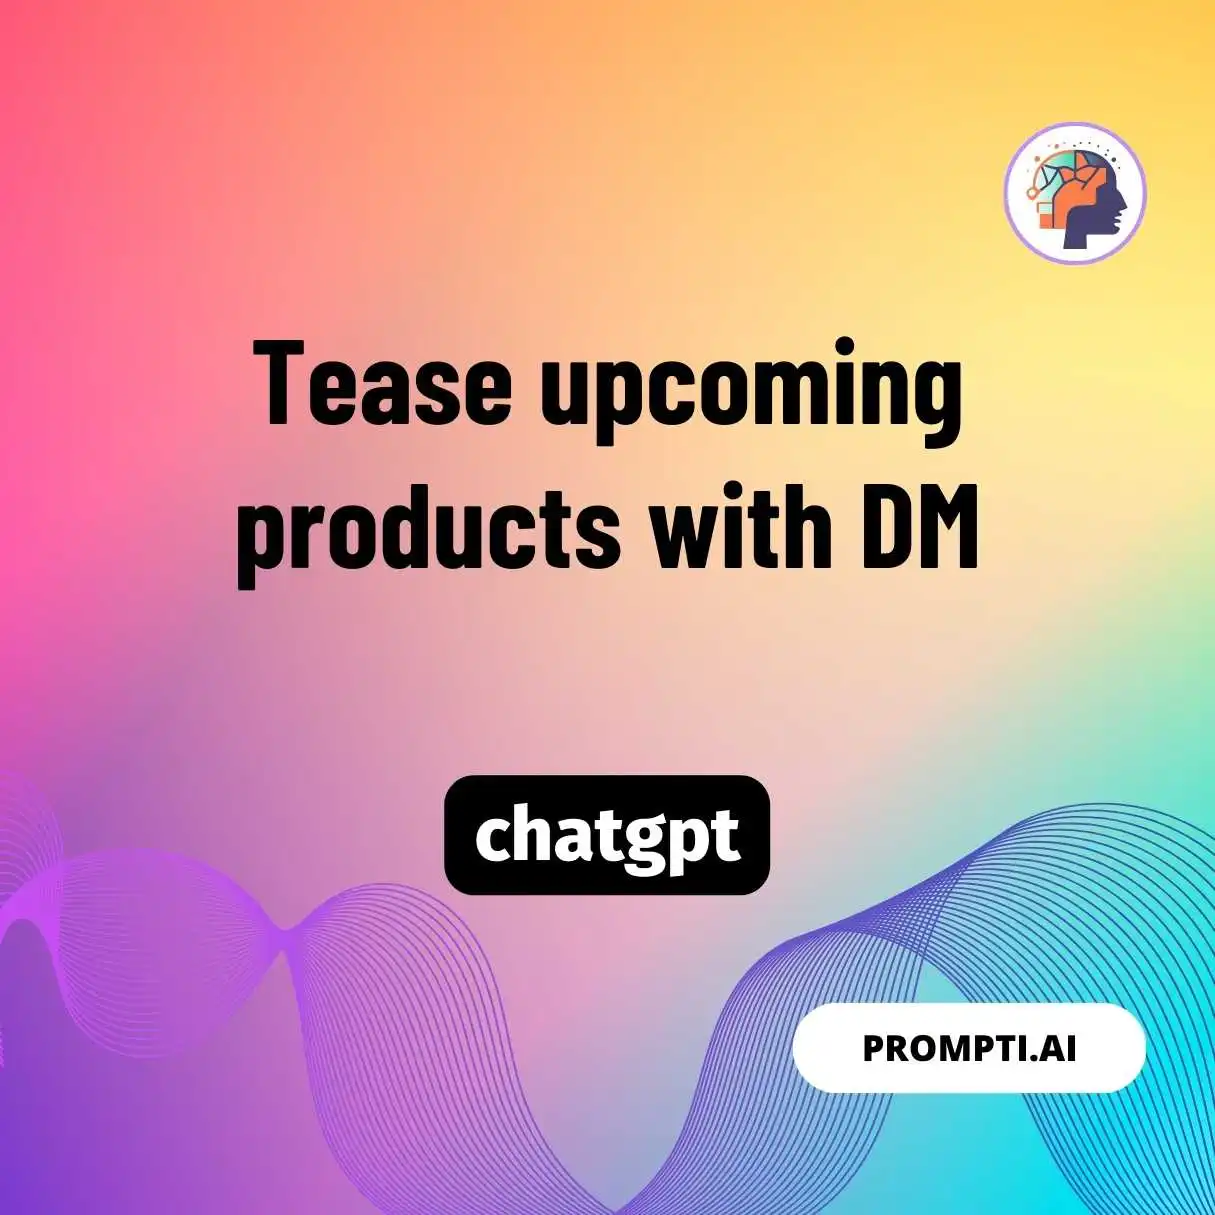 Tease upcoming products with DM